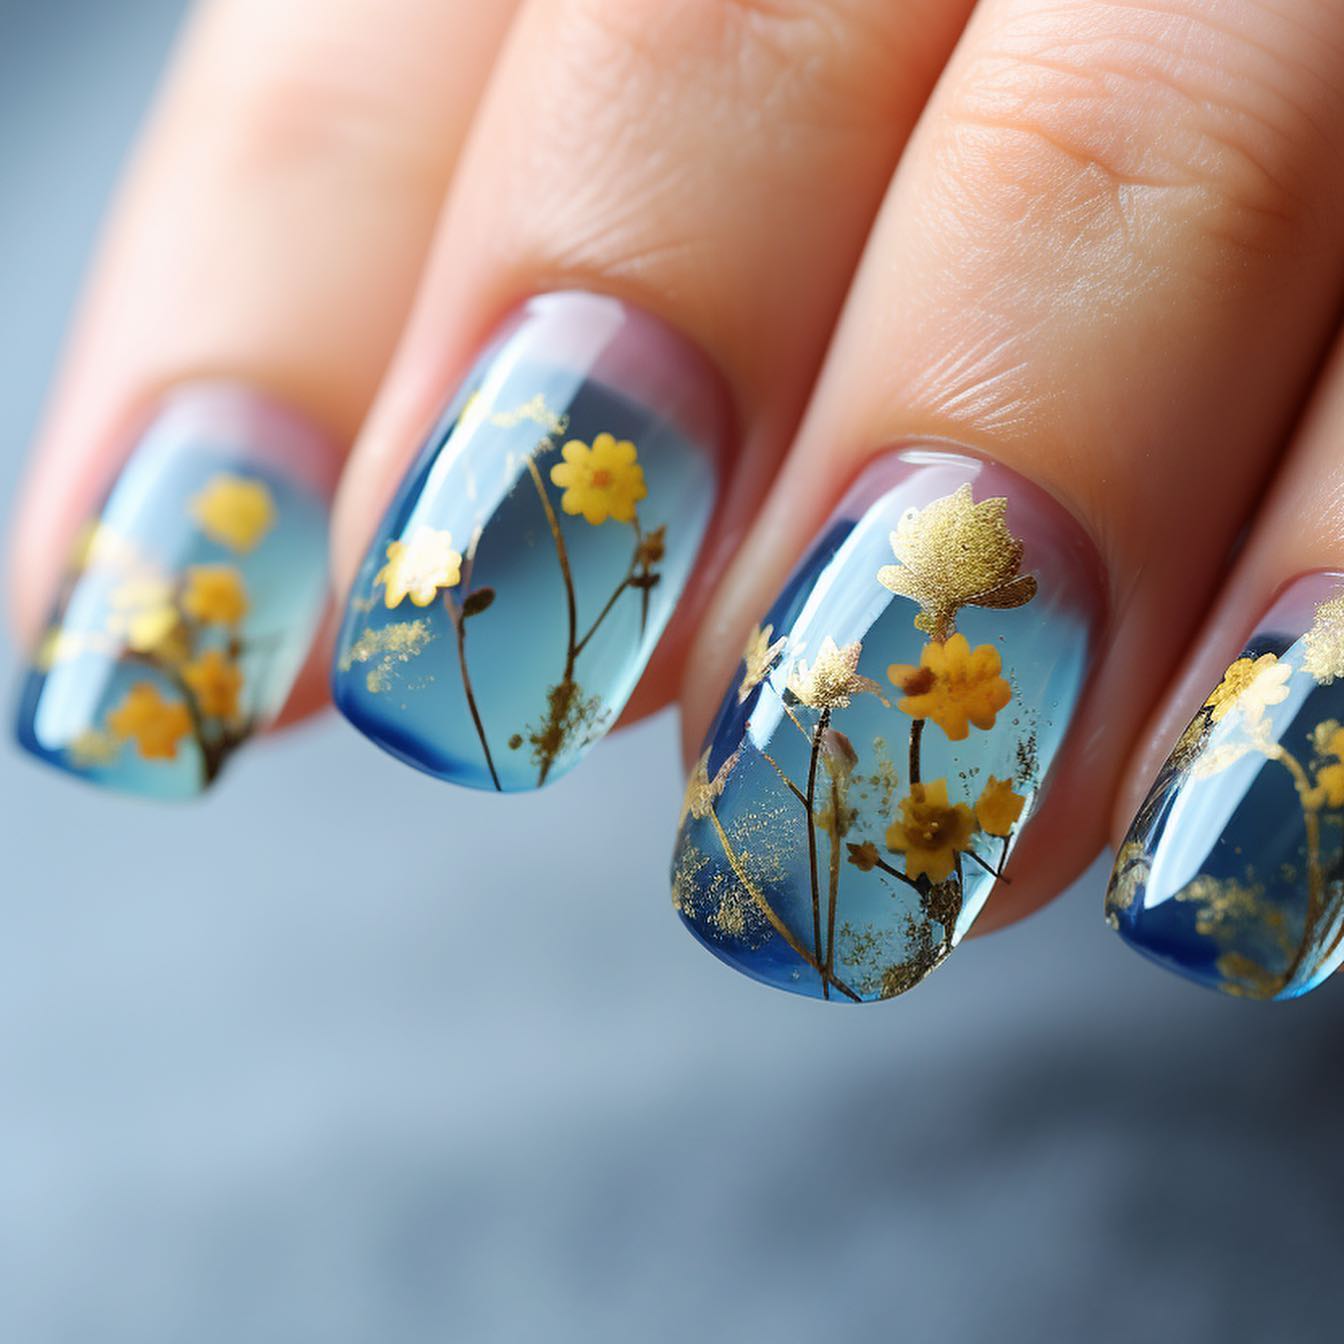 100+ Trendy And Cute Fall Nail Designs To Inspire You This Autumn In 2023 images 45